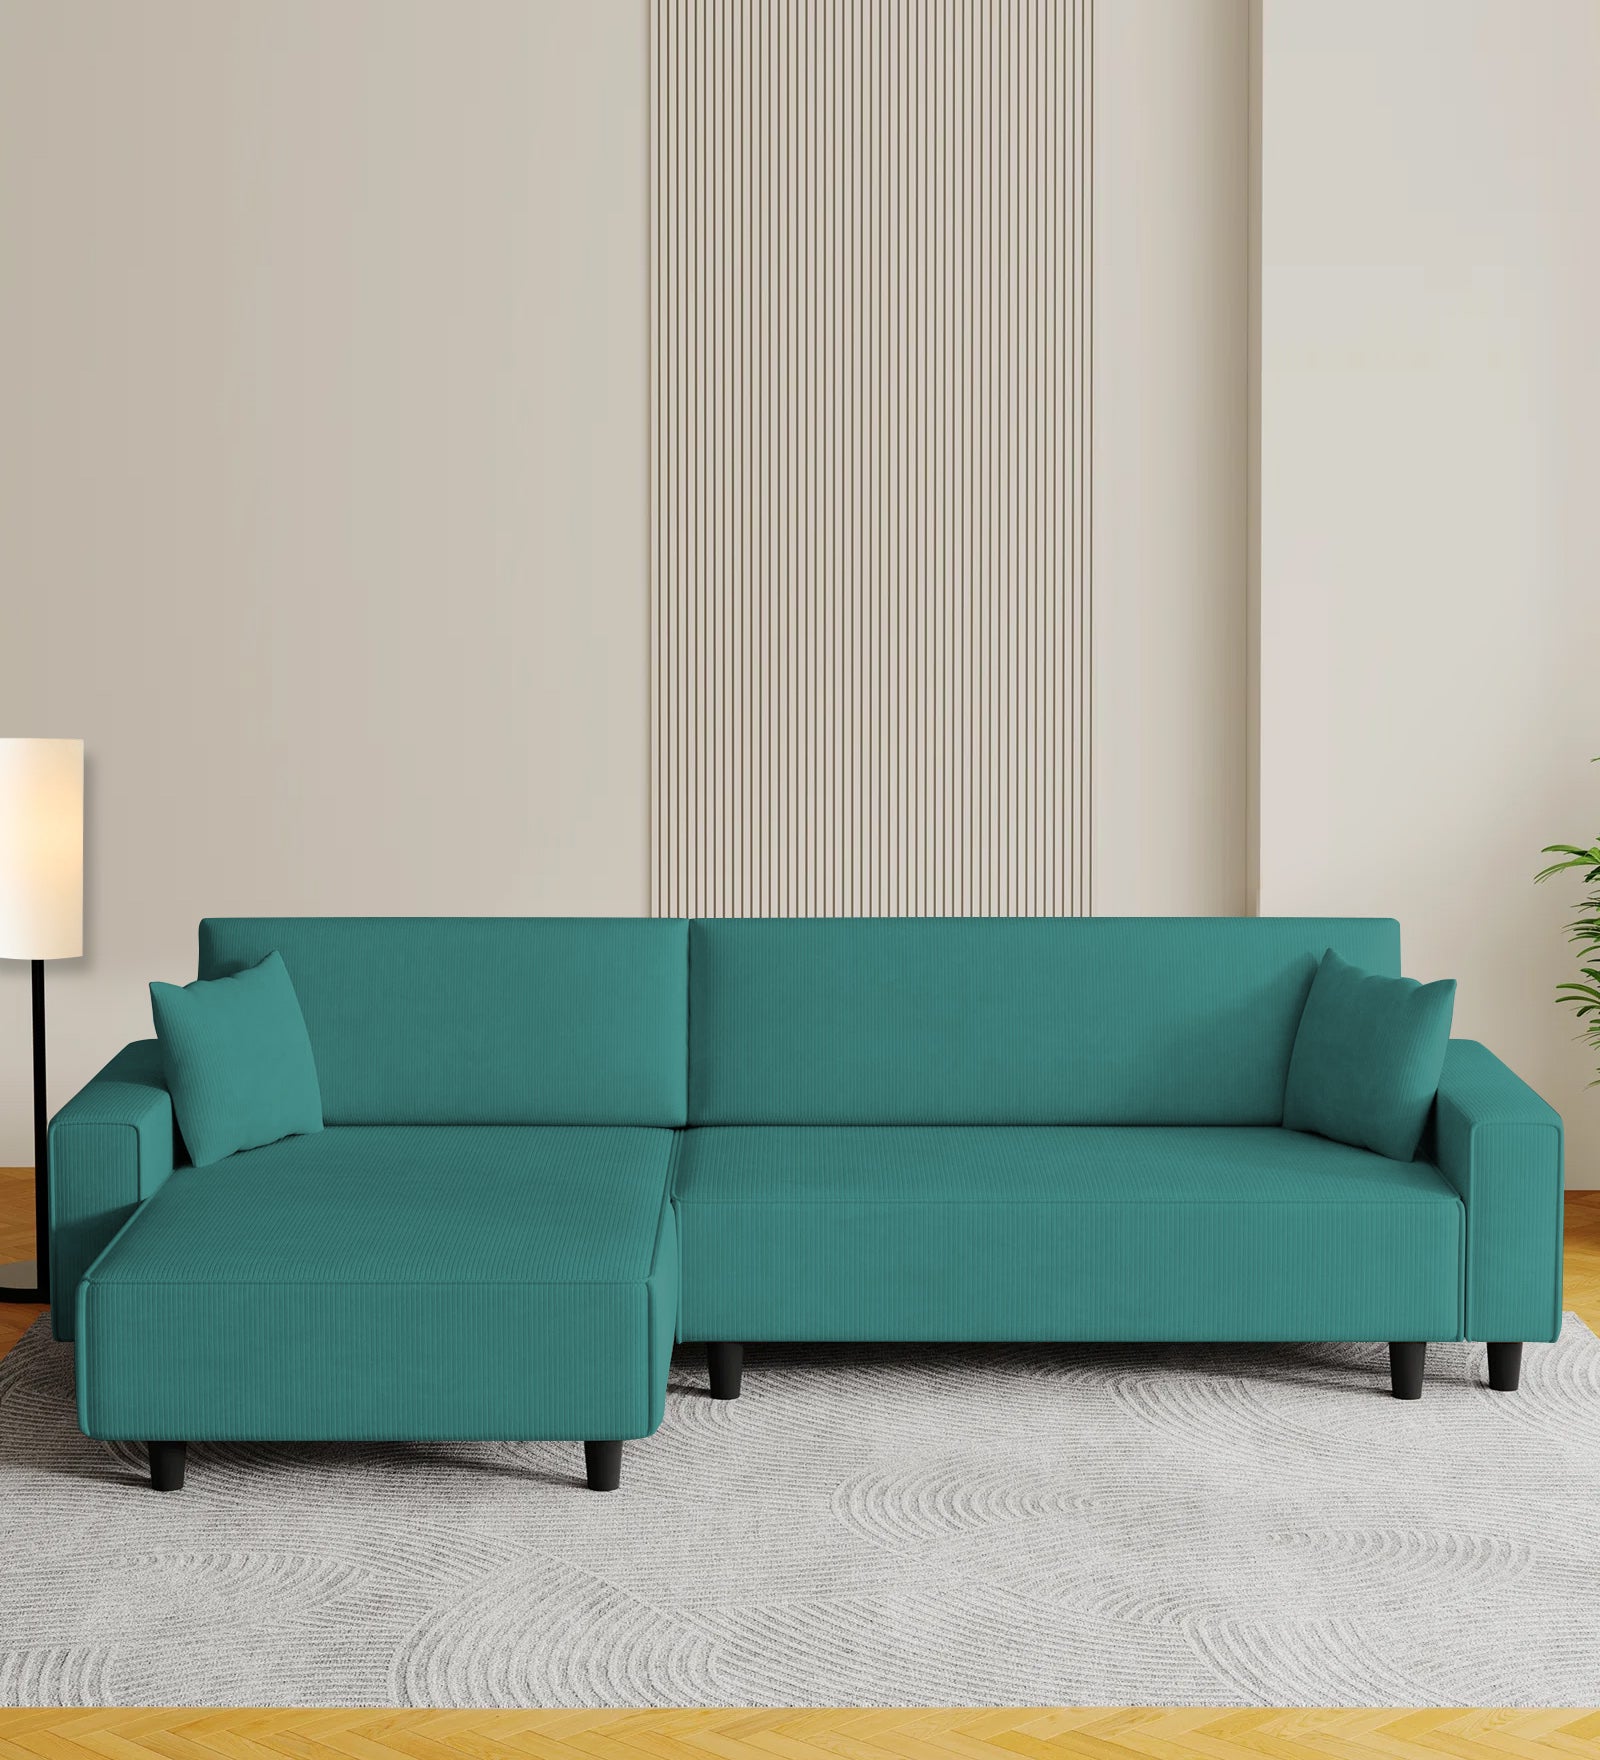 Peach Fabric RHS 6 Seater Sectional Sofa Cum Bed With Storage In Sea Green Colour